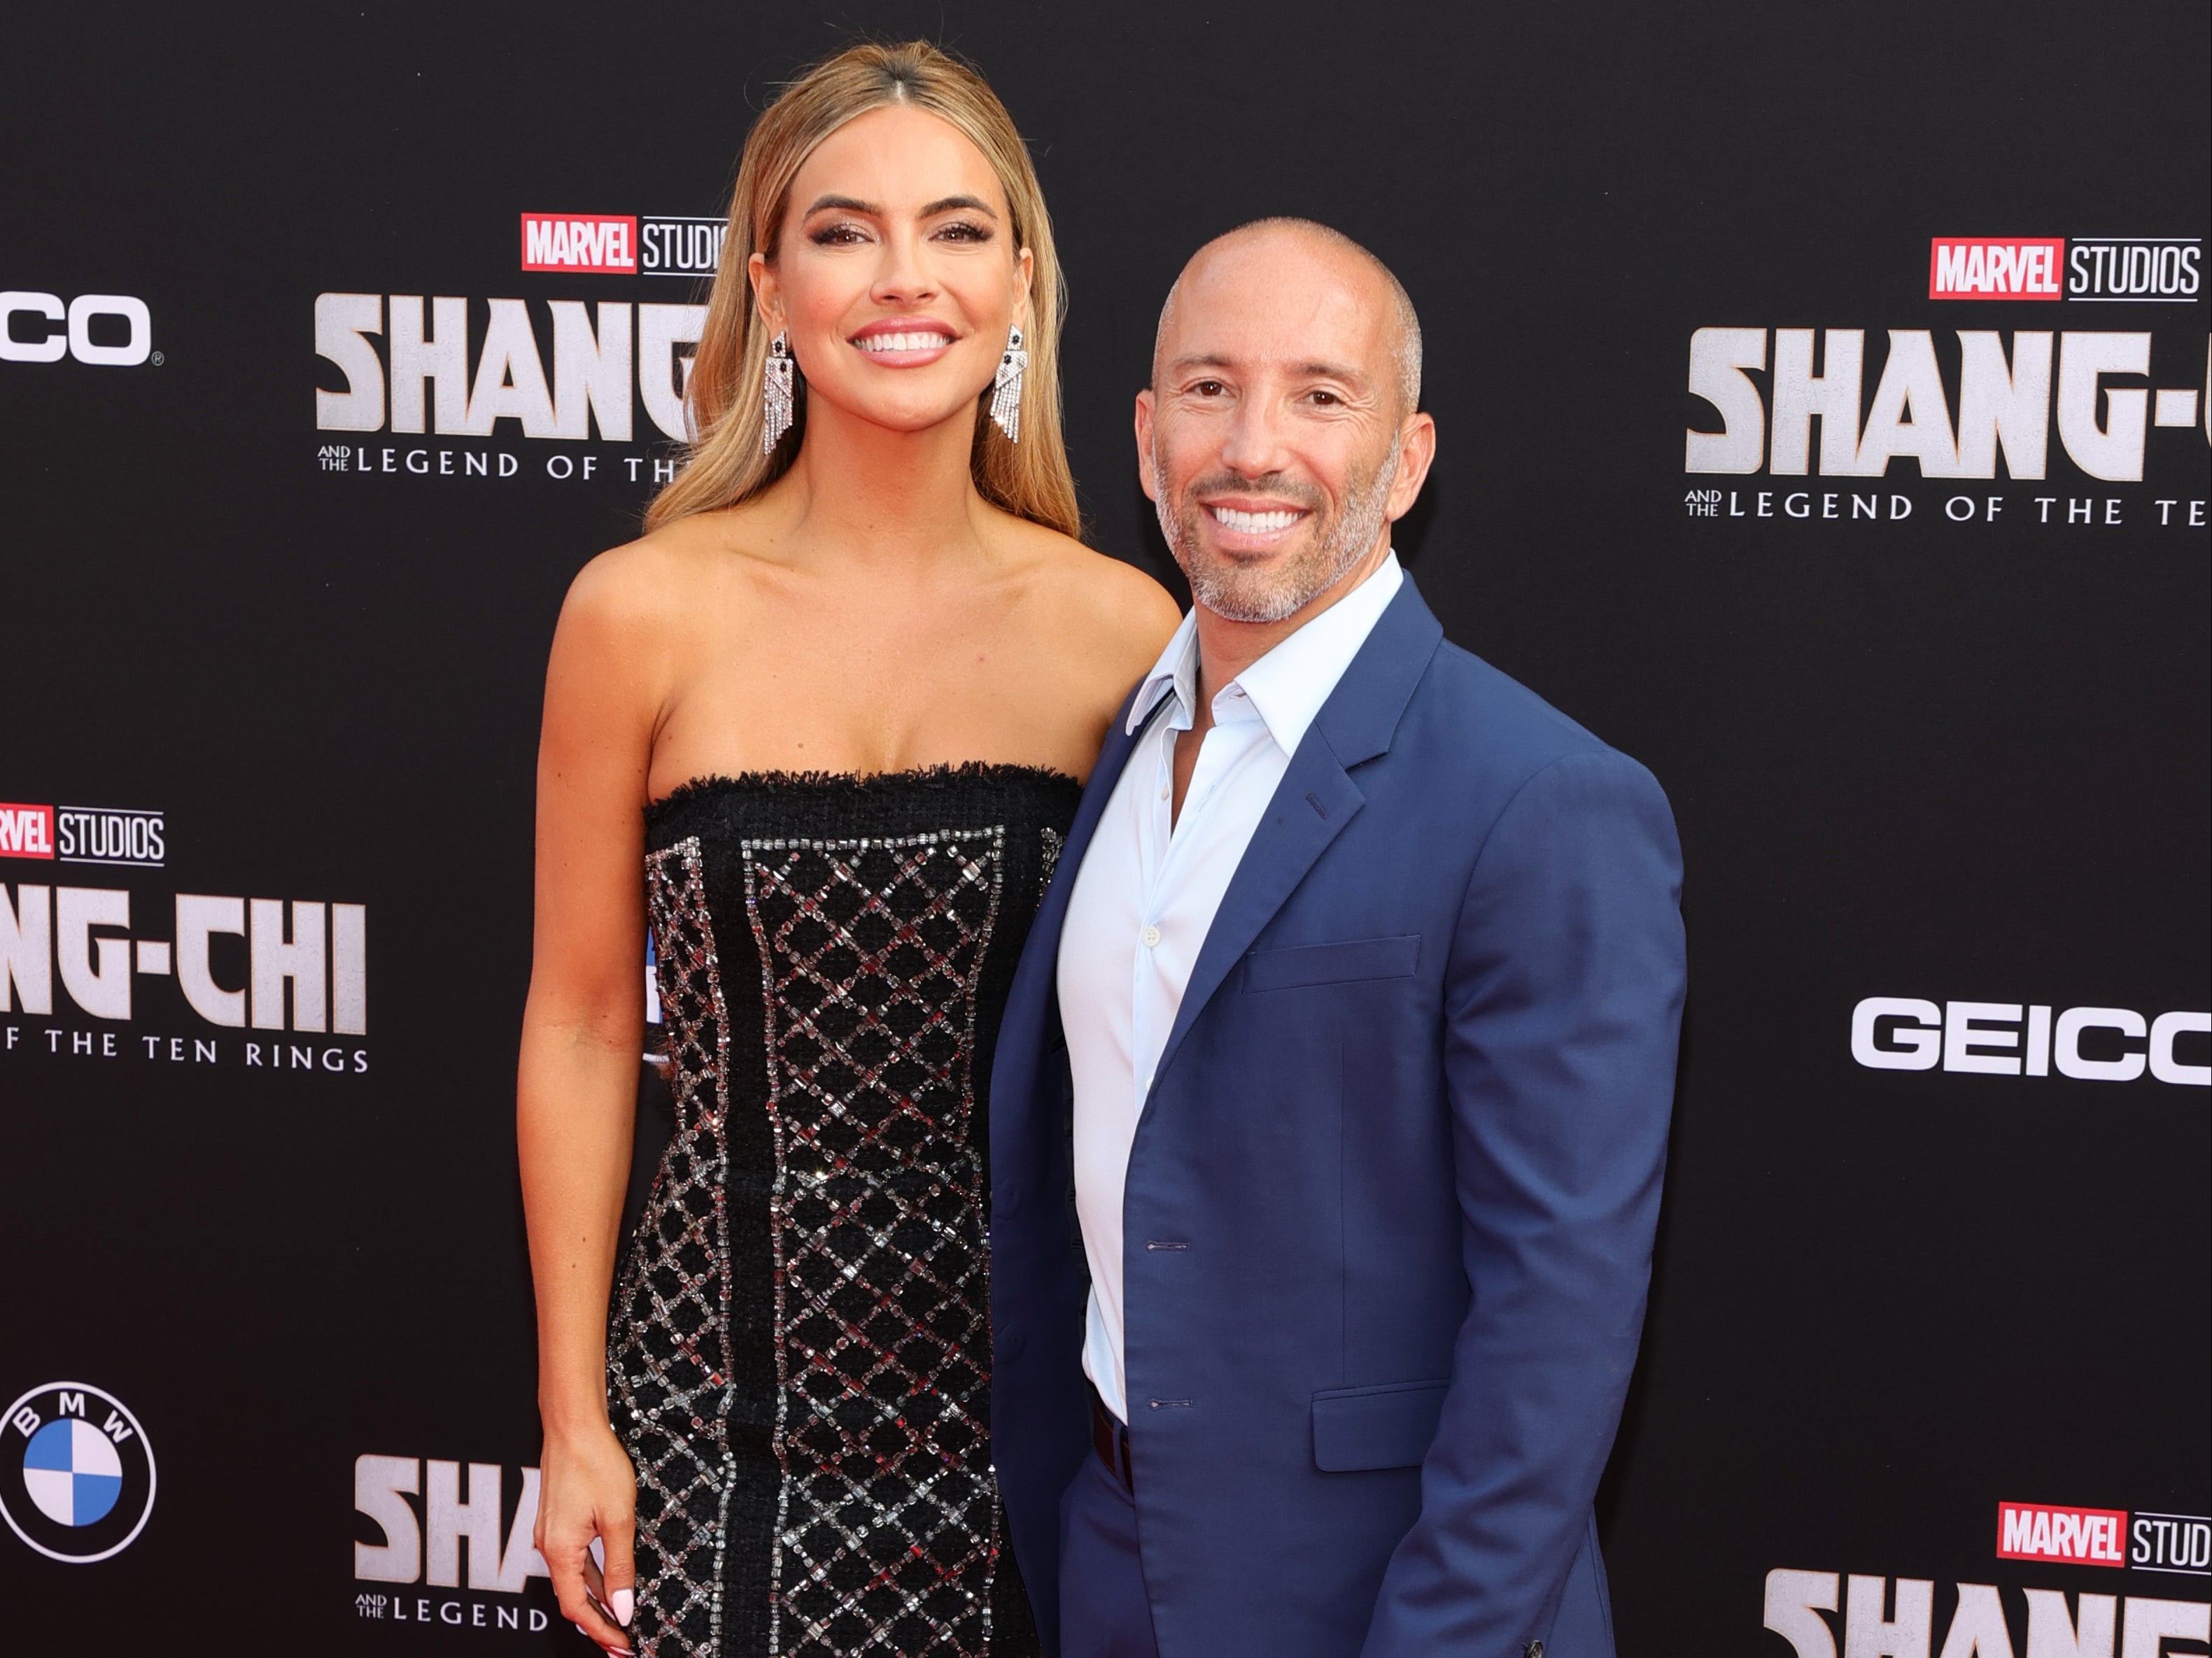 Chrishell Stause and Jason Oppenheim attend Disney's premiere of "Shang-Chi And The Legend Of The Ten Rings" at El Capitan Theatre on August 16, 2021